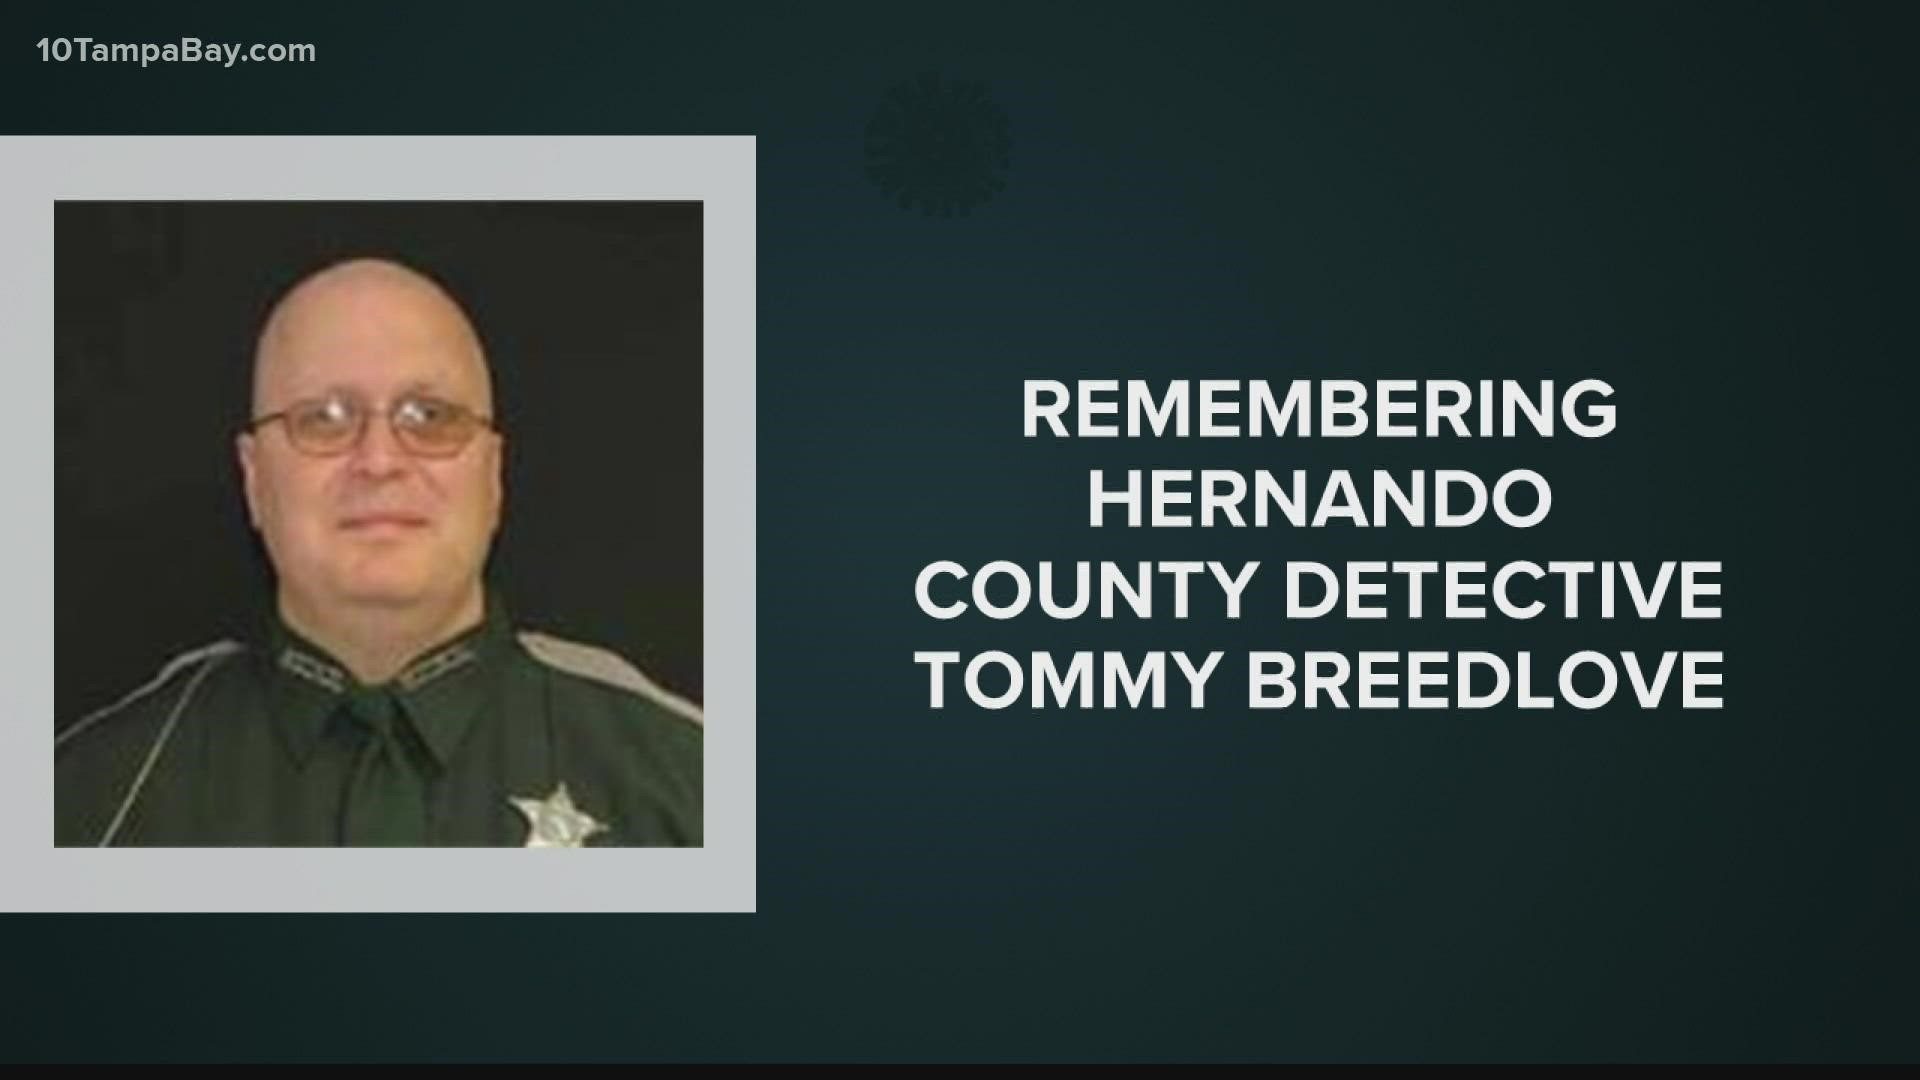 Detective Tommy Breedlove was 54 years old.